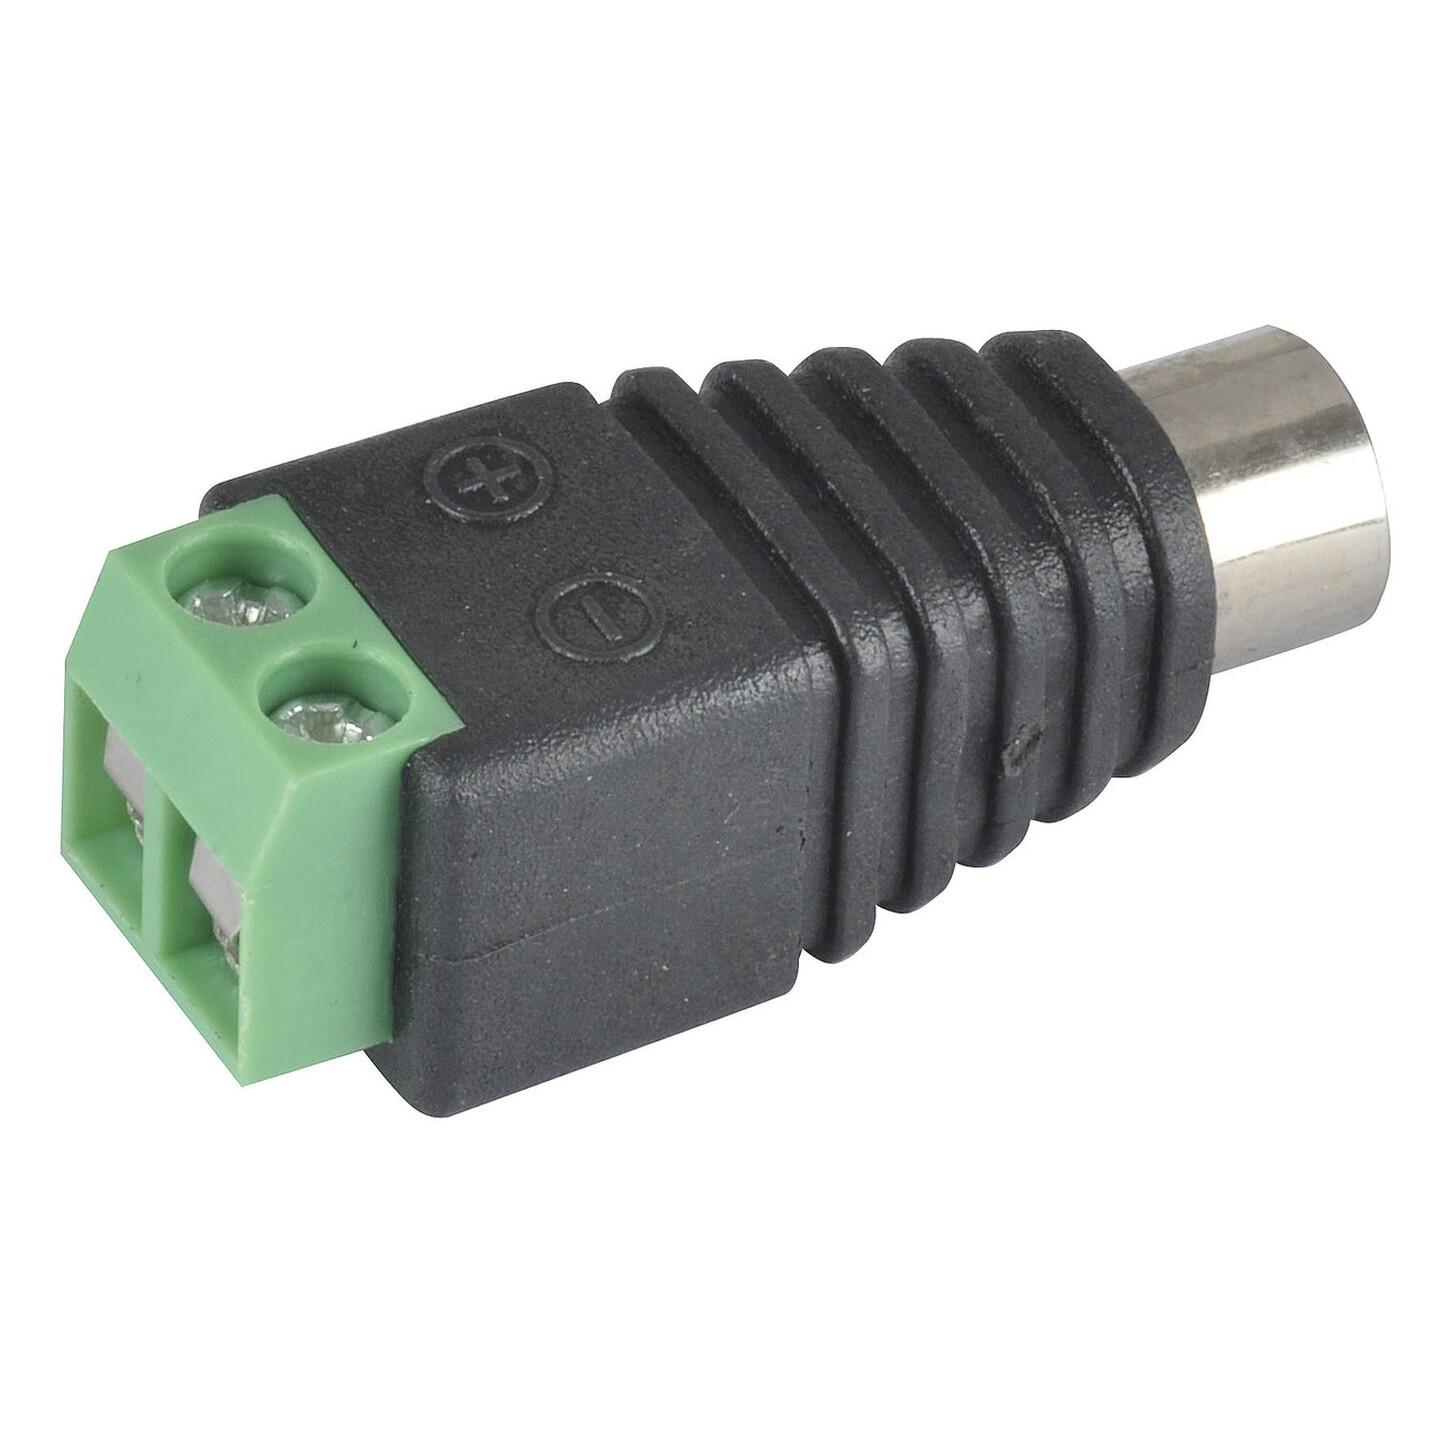 RCA Socket with Screw Terminals